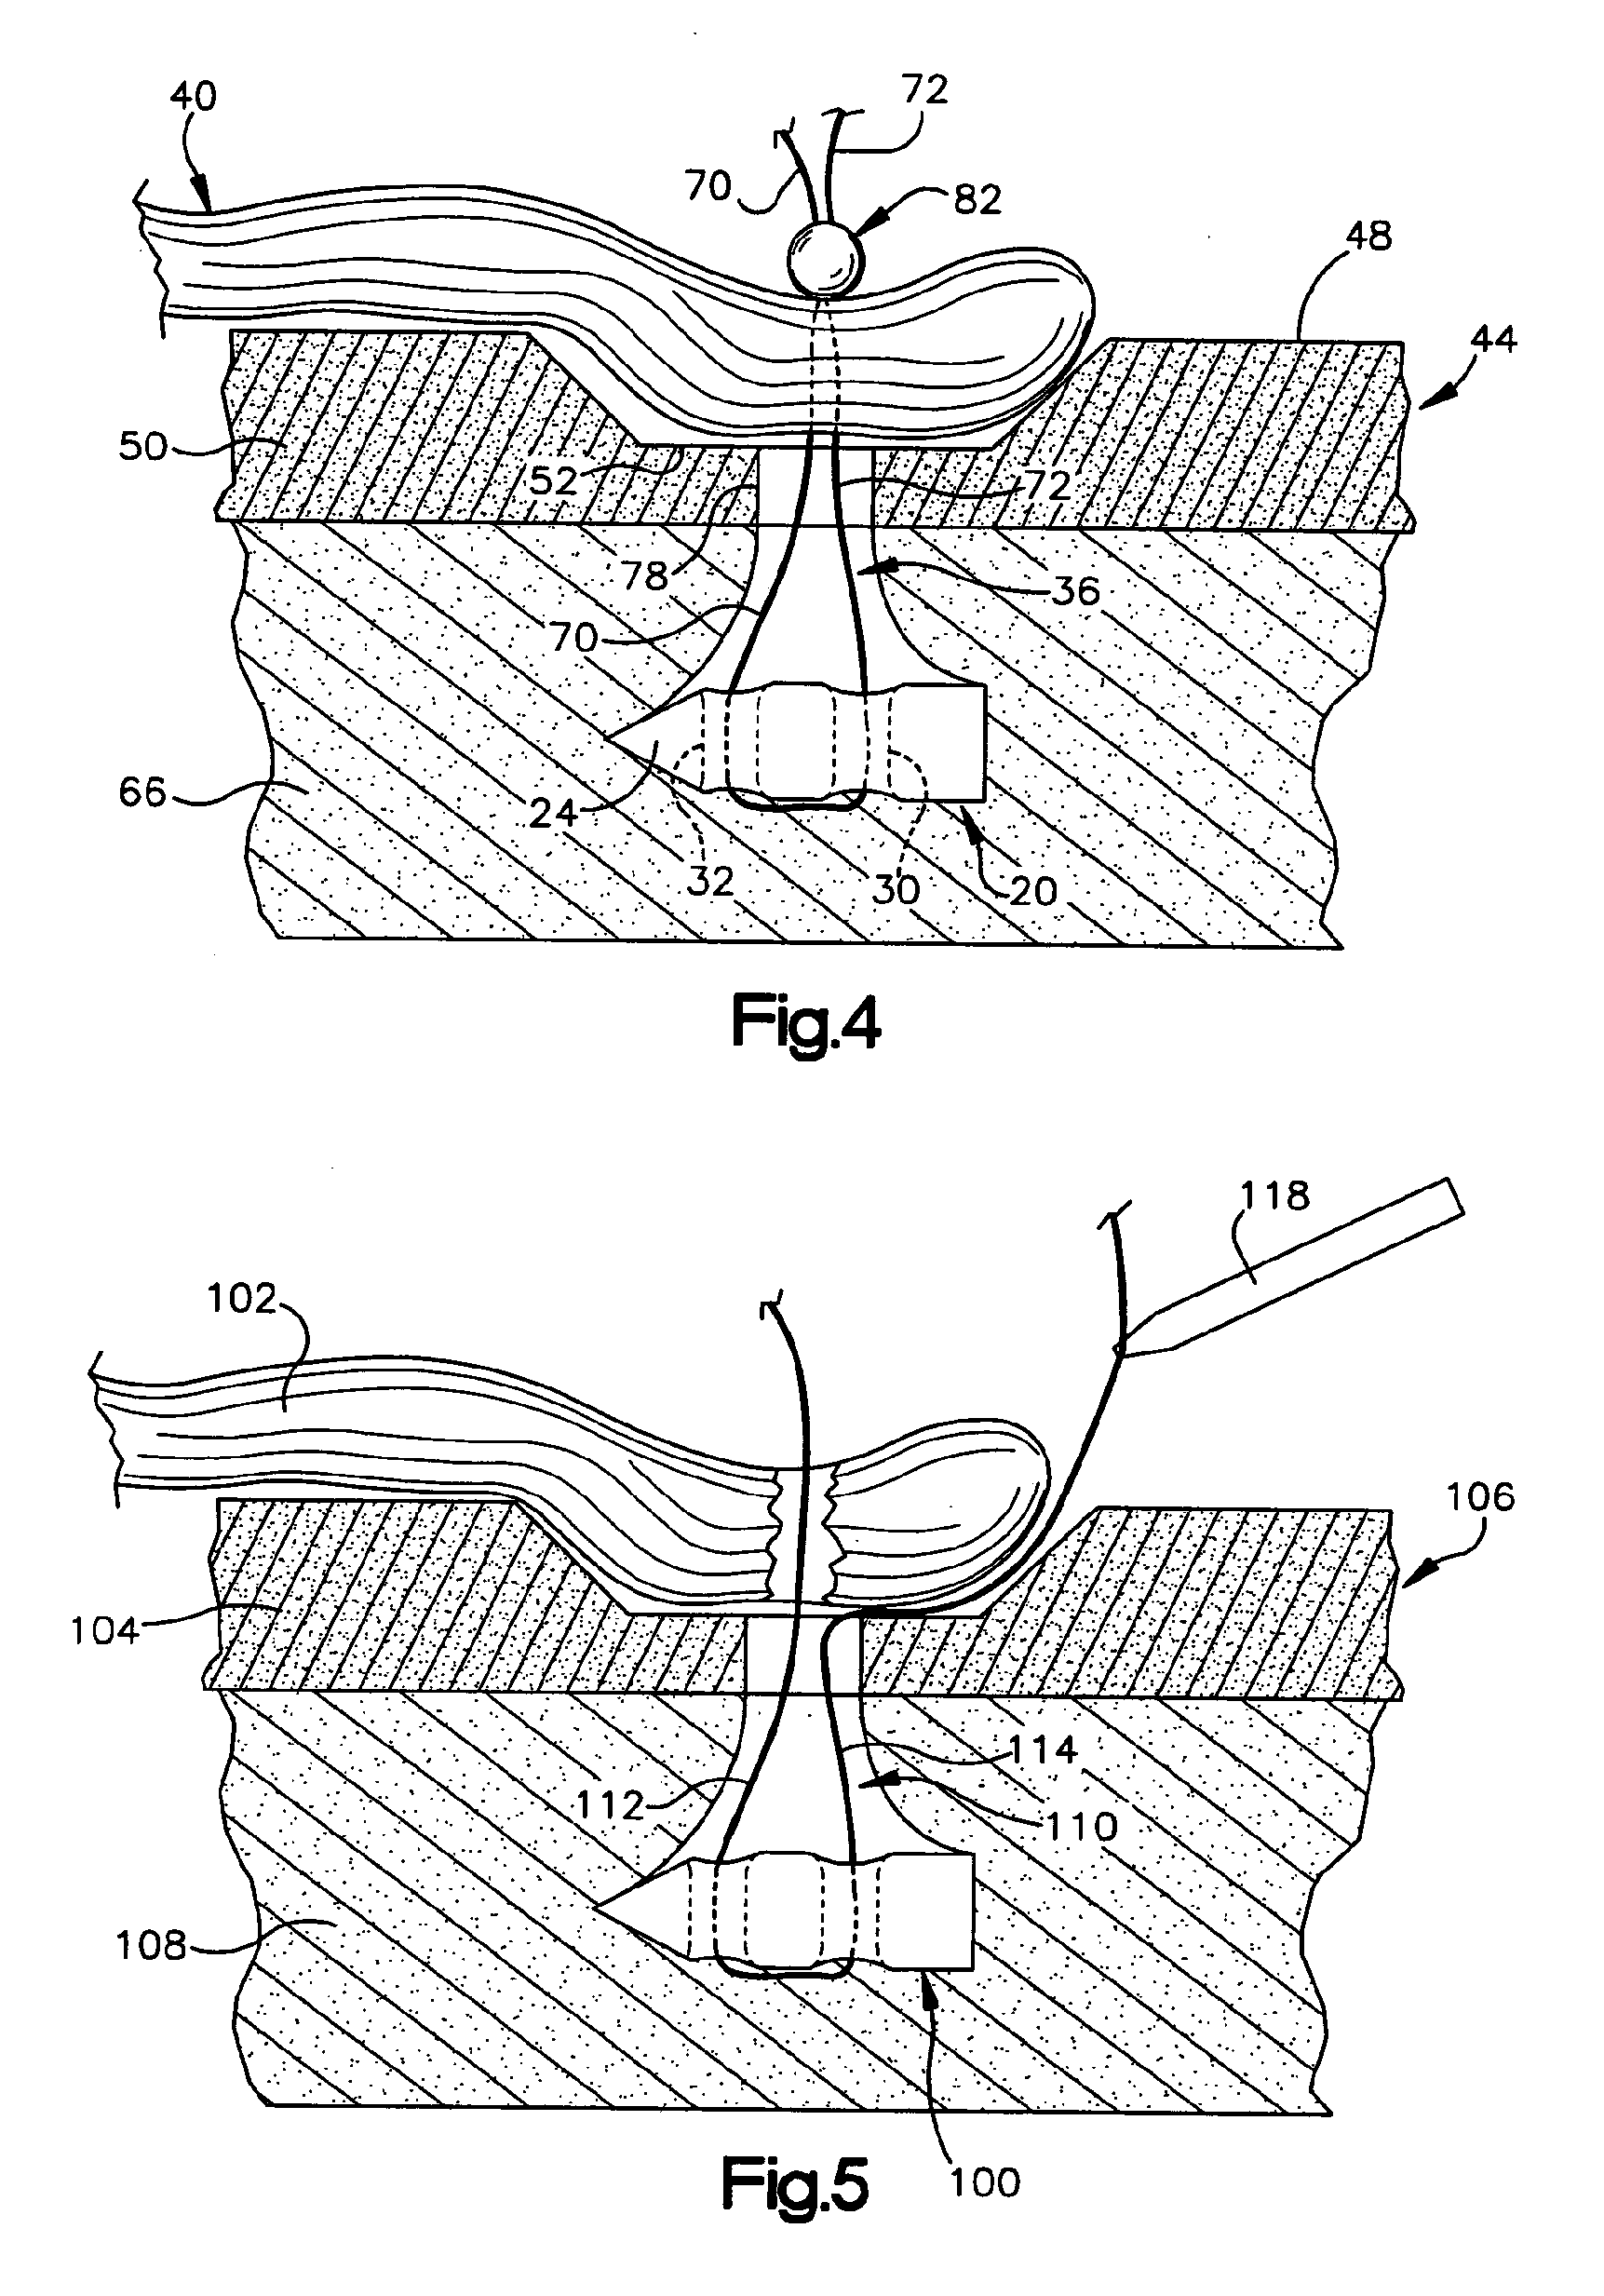 Method and apparatus for securing tissue